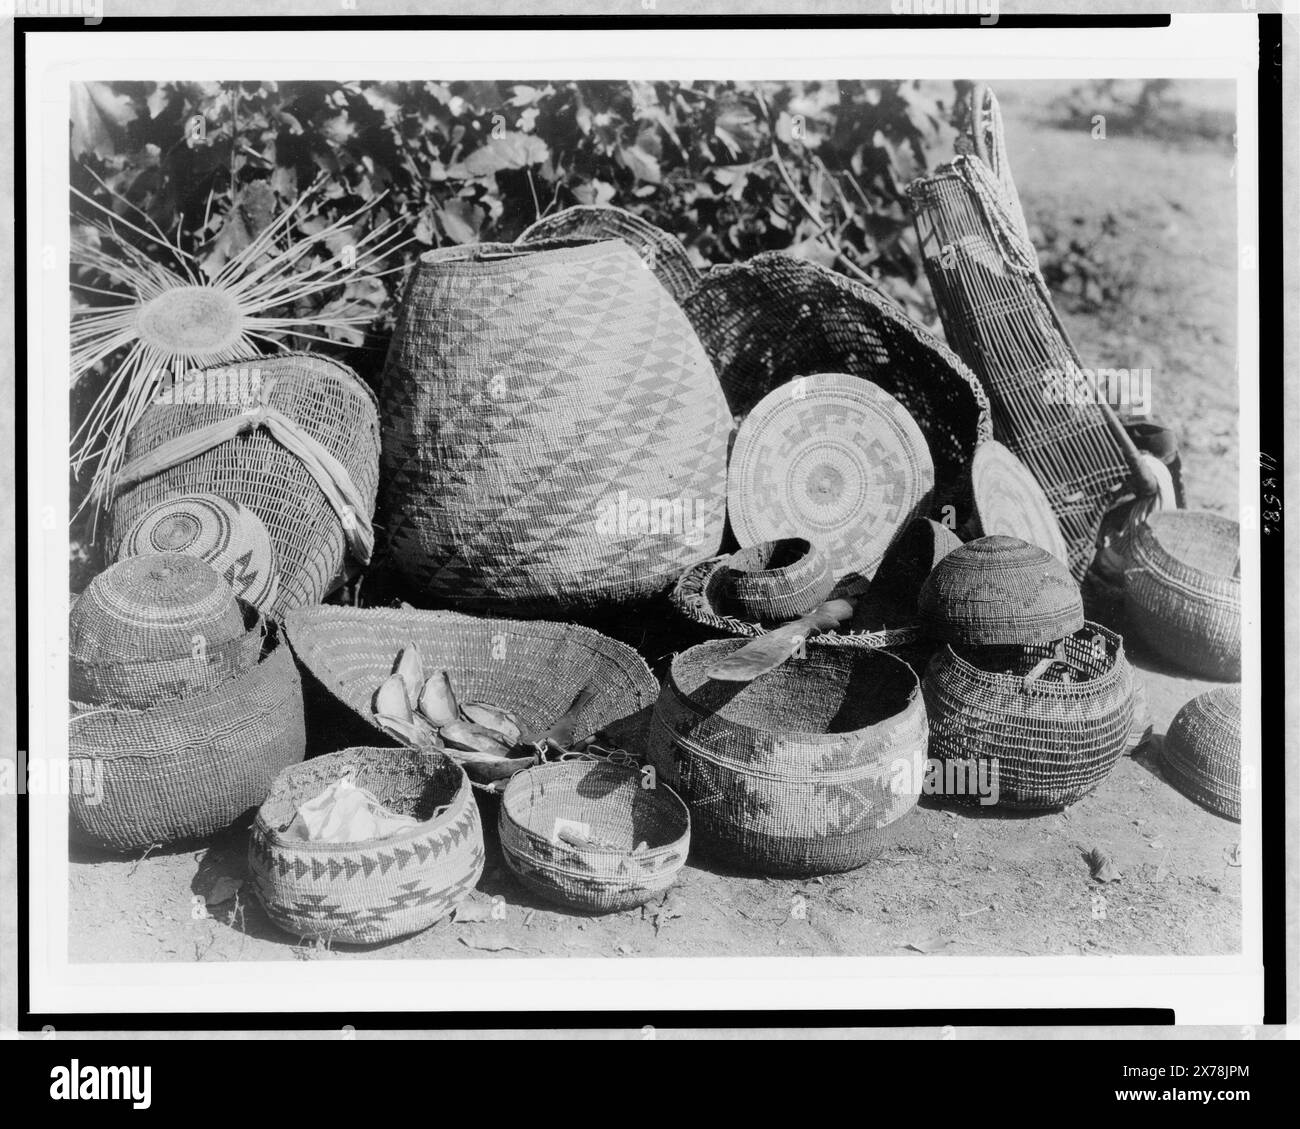 Karok baskets, Edward S. Curtis Collection ., Curtis no. 3881., Published in: The North American Indian / Edward S. Curtis. [Seattle, Wash.] : Edward S. Curtis, 1907-30, Suppl. v. 13, pl. 438.. Indians of North America, Arts & crafts, 1920-1930. , Karok Indians, Arts & crafts, 1920-1930. , Baskets, 1920-1930. Stock Photo